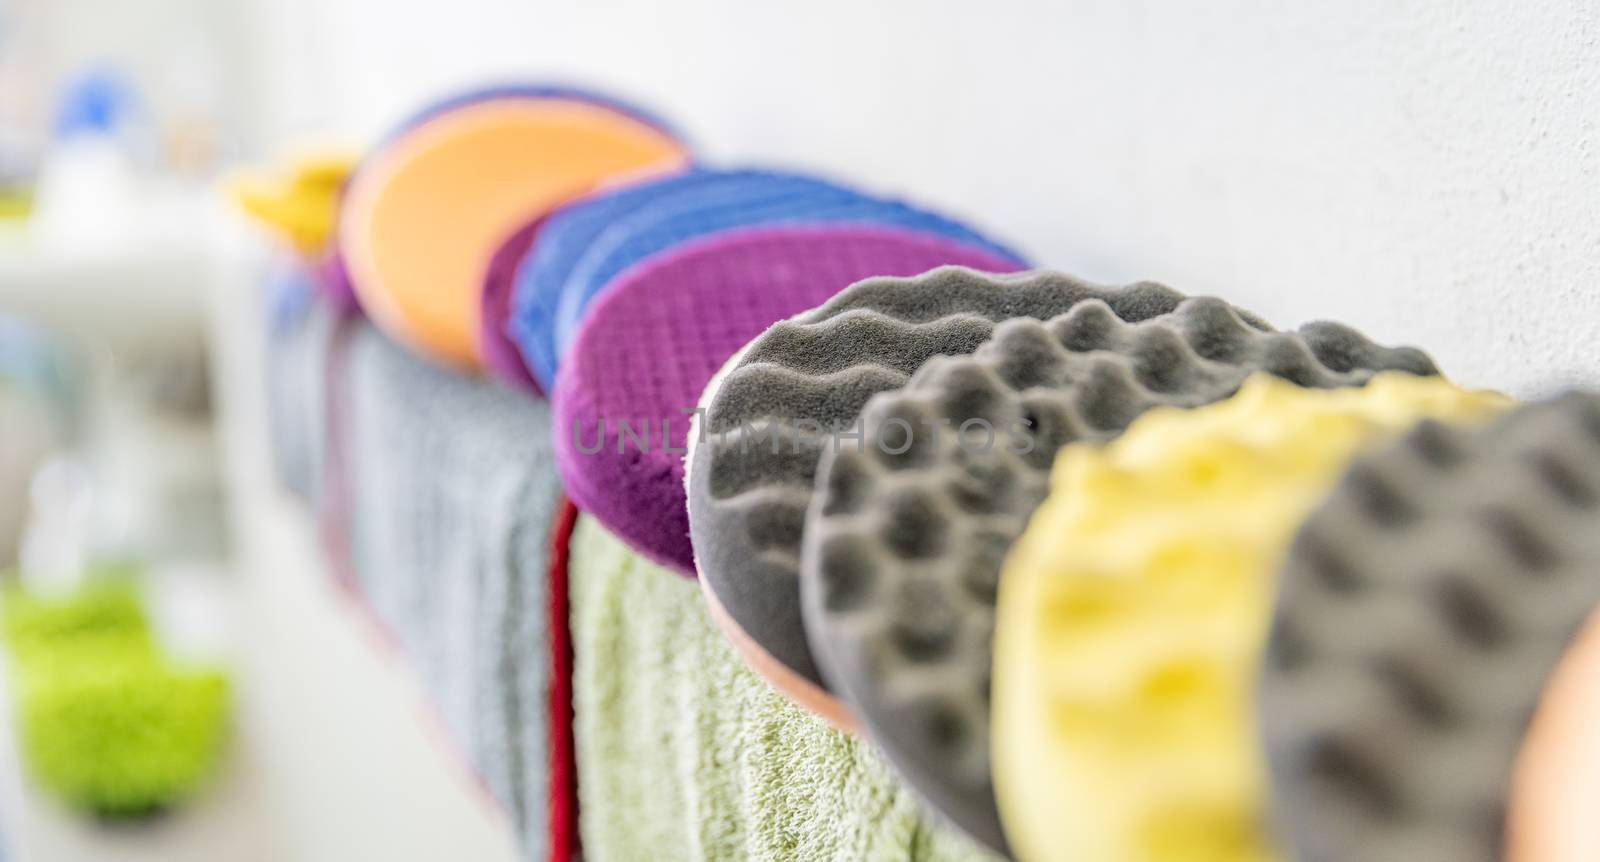 colored sponges for washing and polishing the interior and exterior of cars.